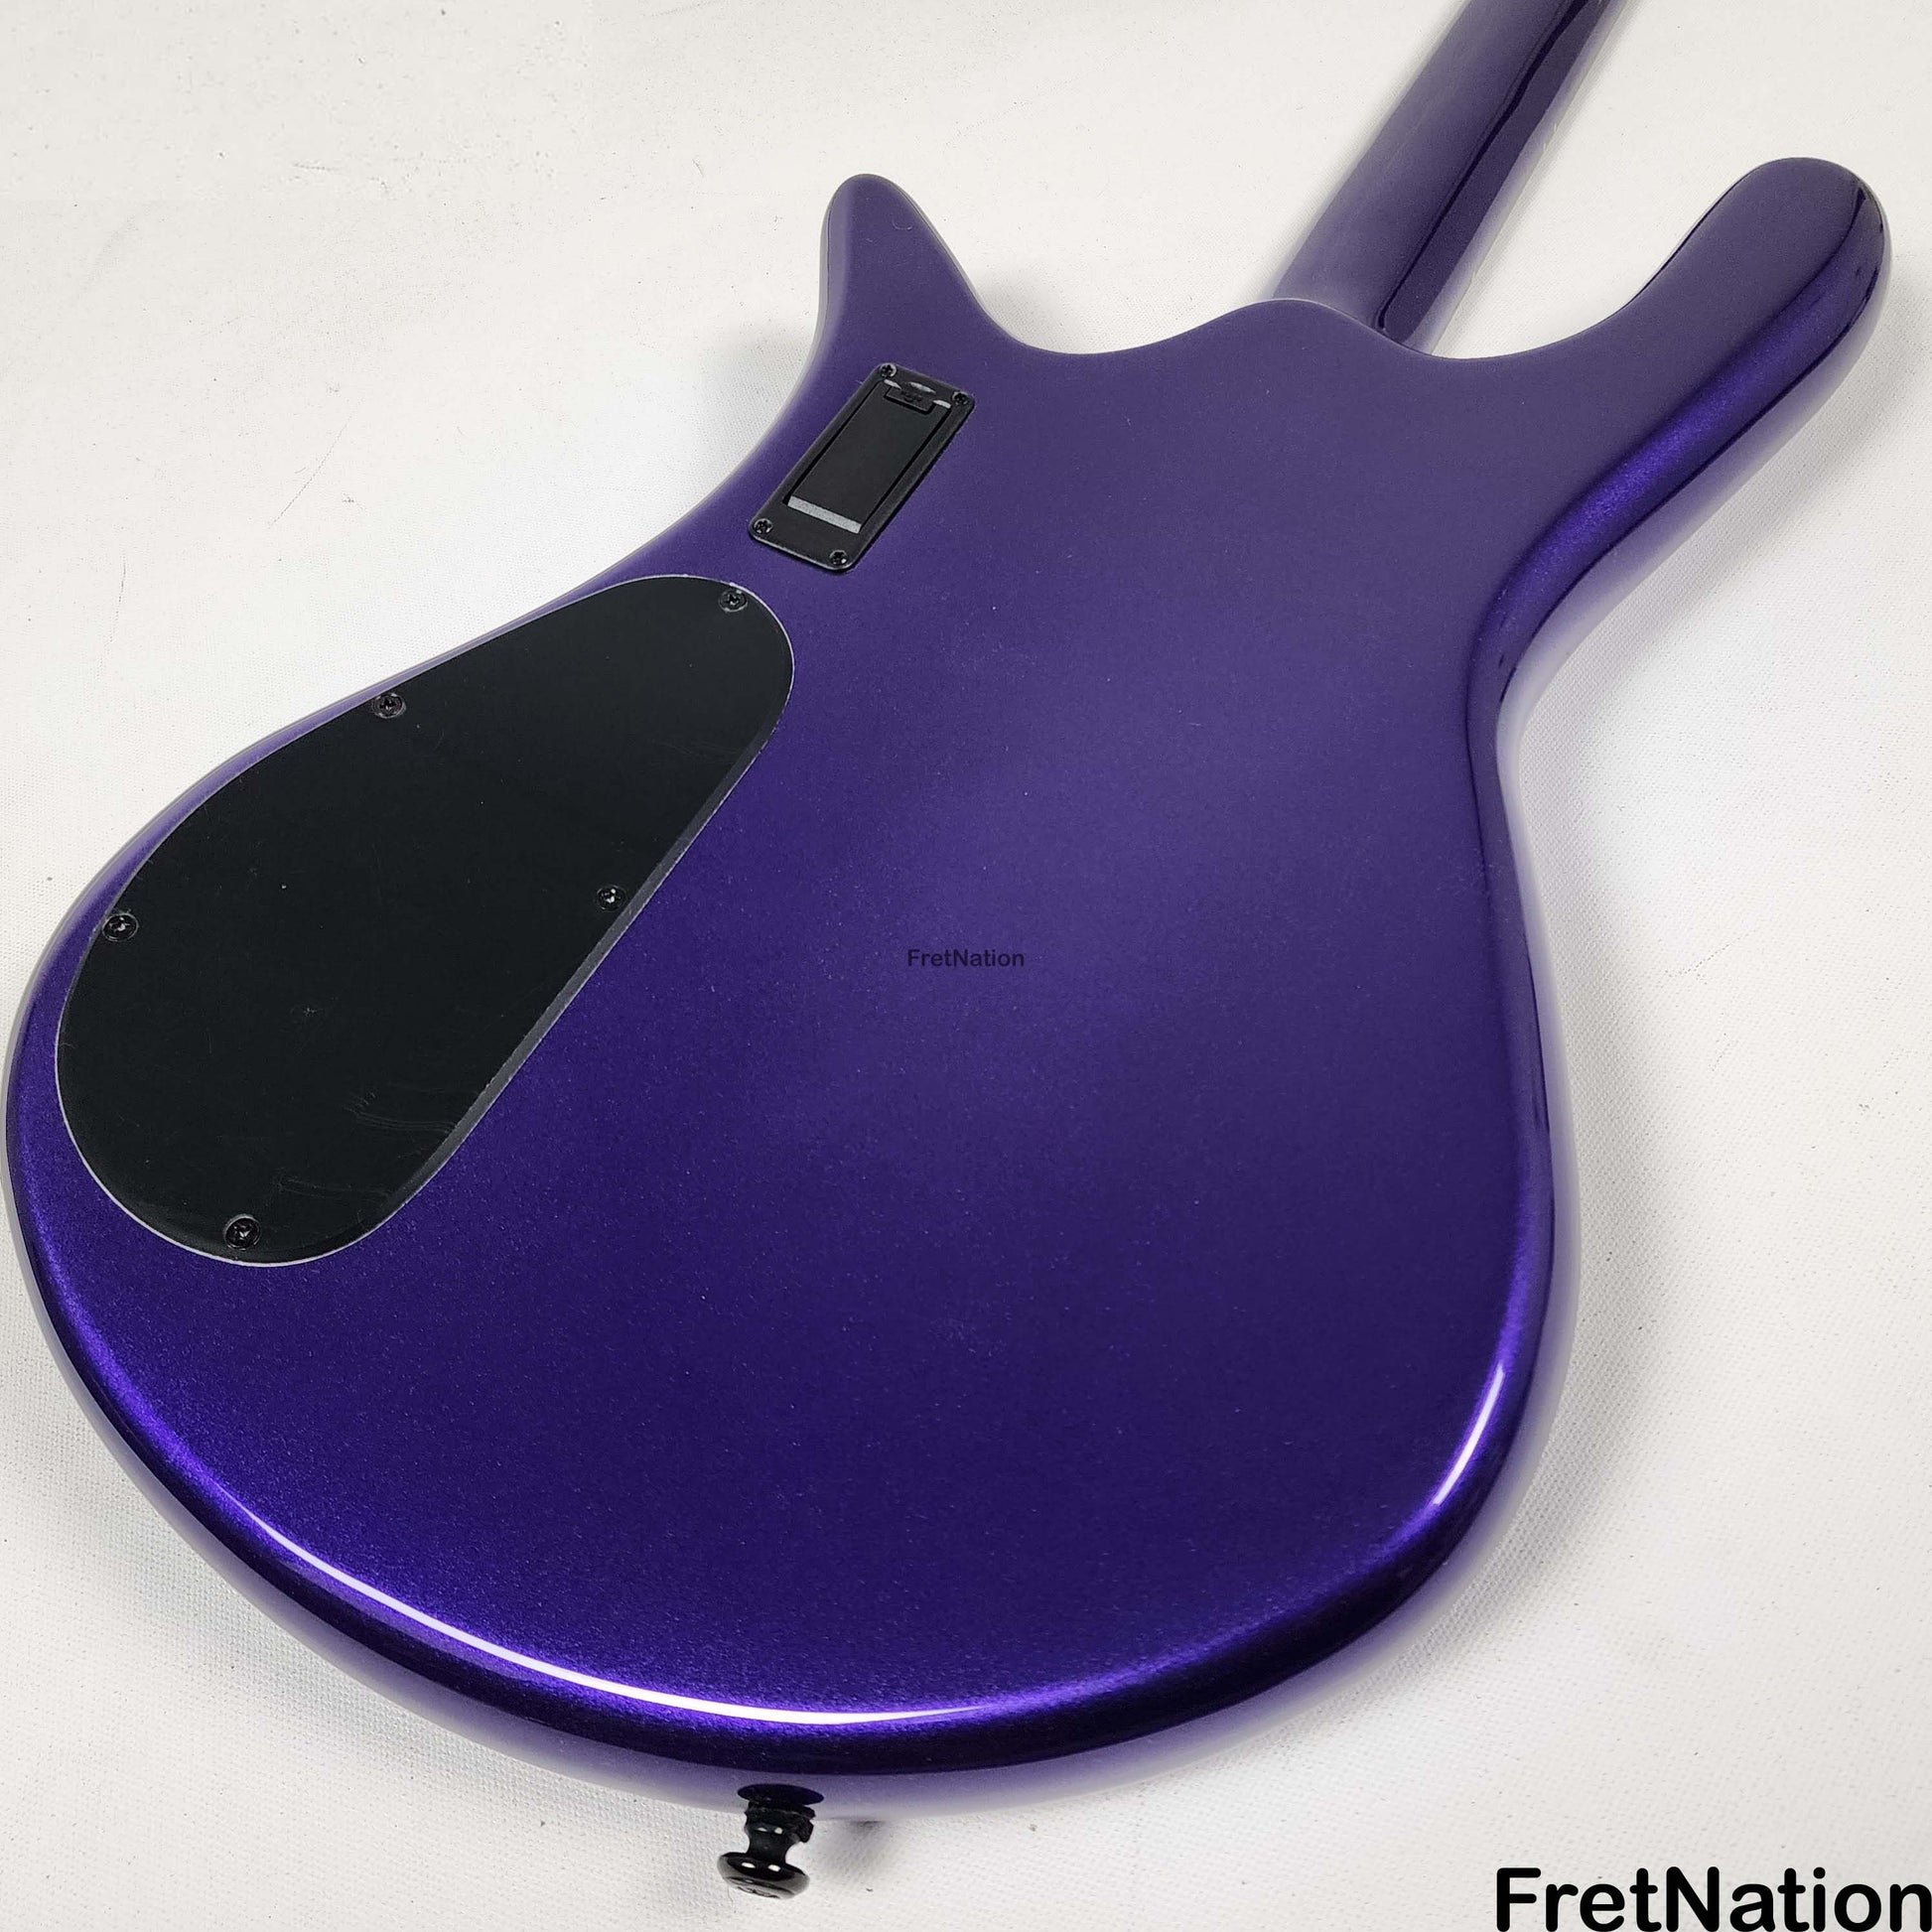 Spector Spector NS Dimensions 4-String Multi-Scale Bass - Plum Crazy 8.80lbs W231279